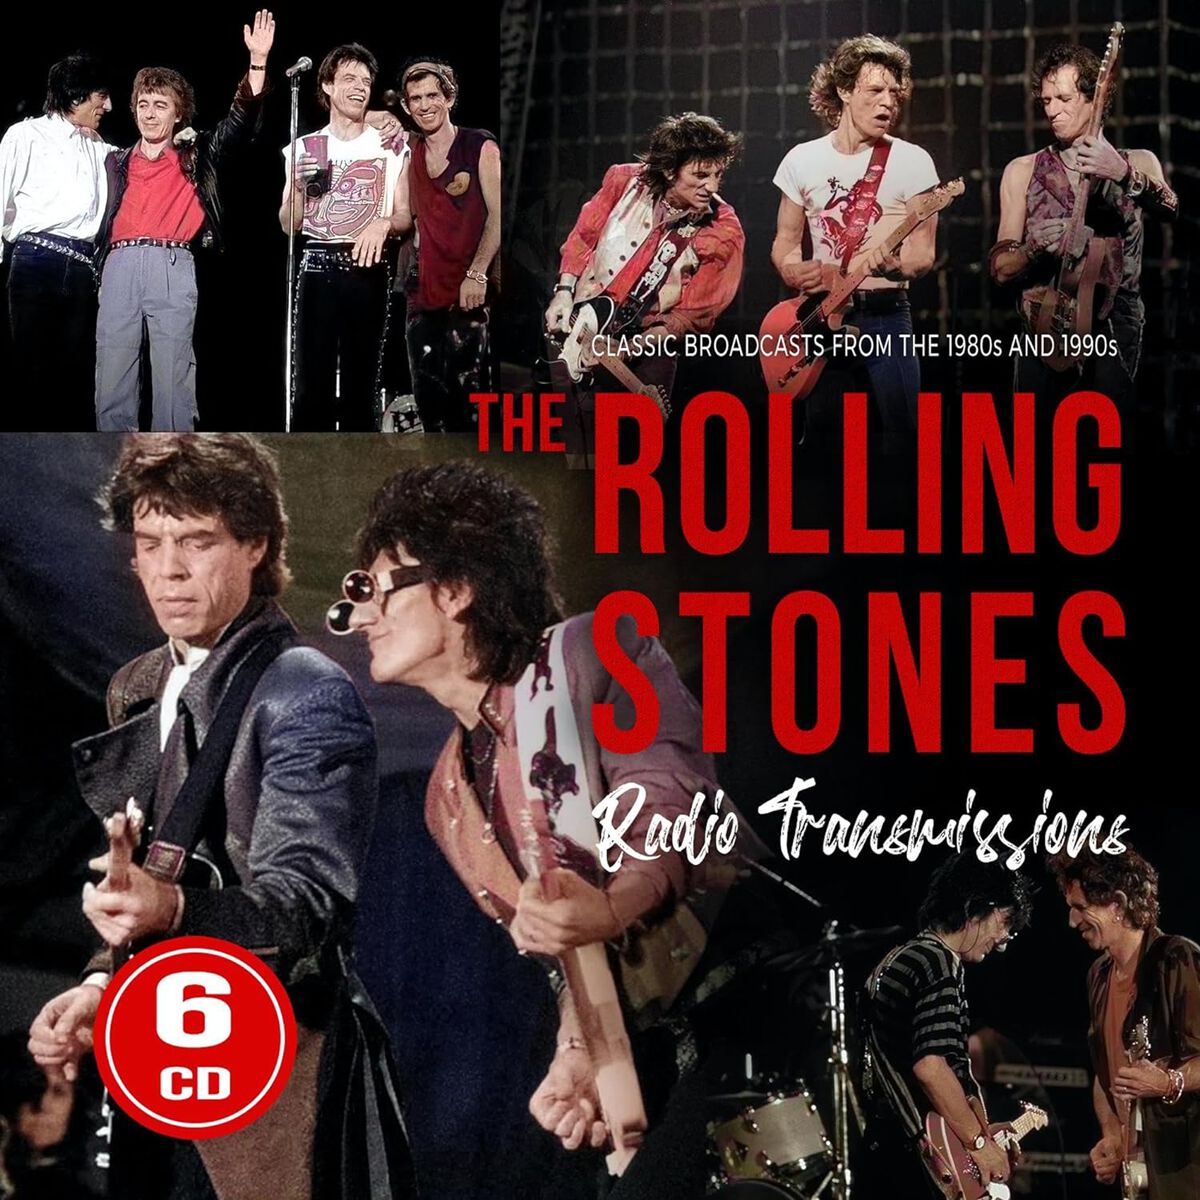 The Rolling Stones Radio transmissions CD multicolor